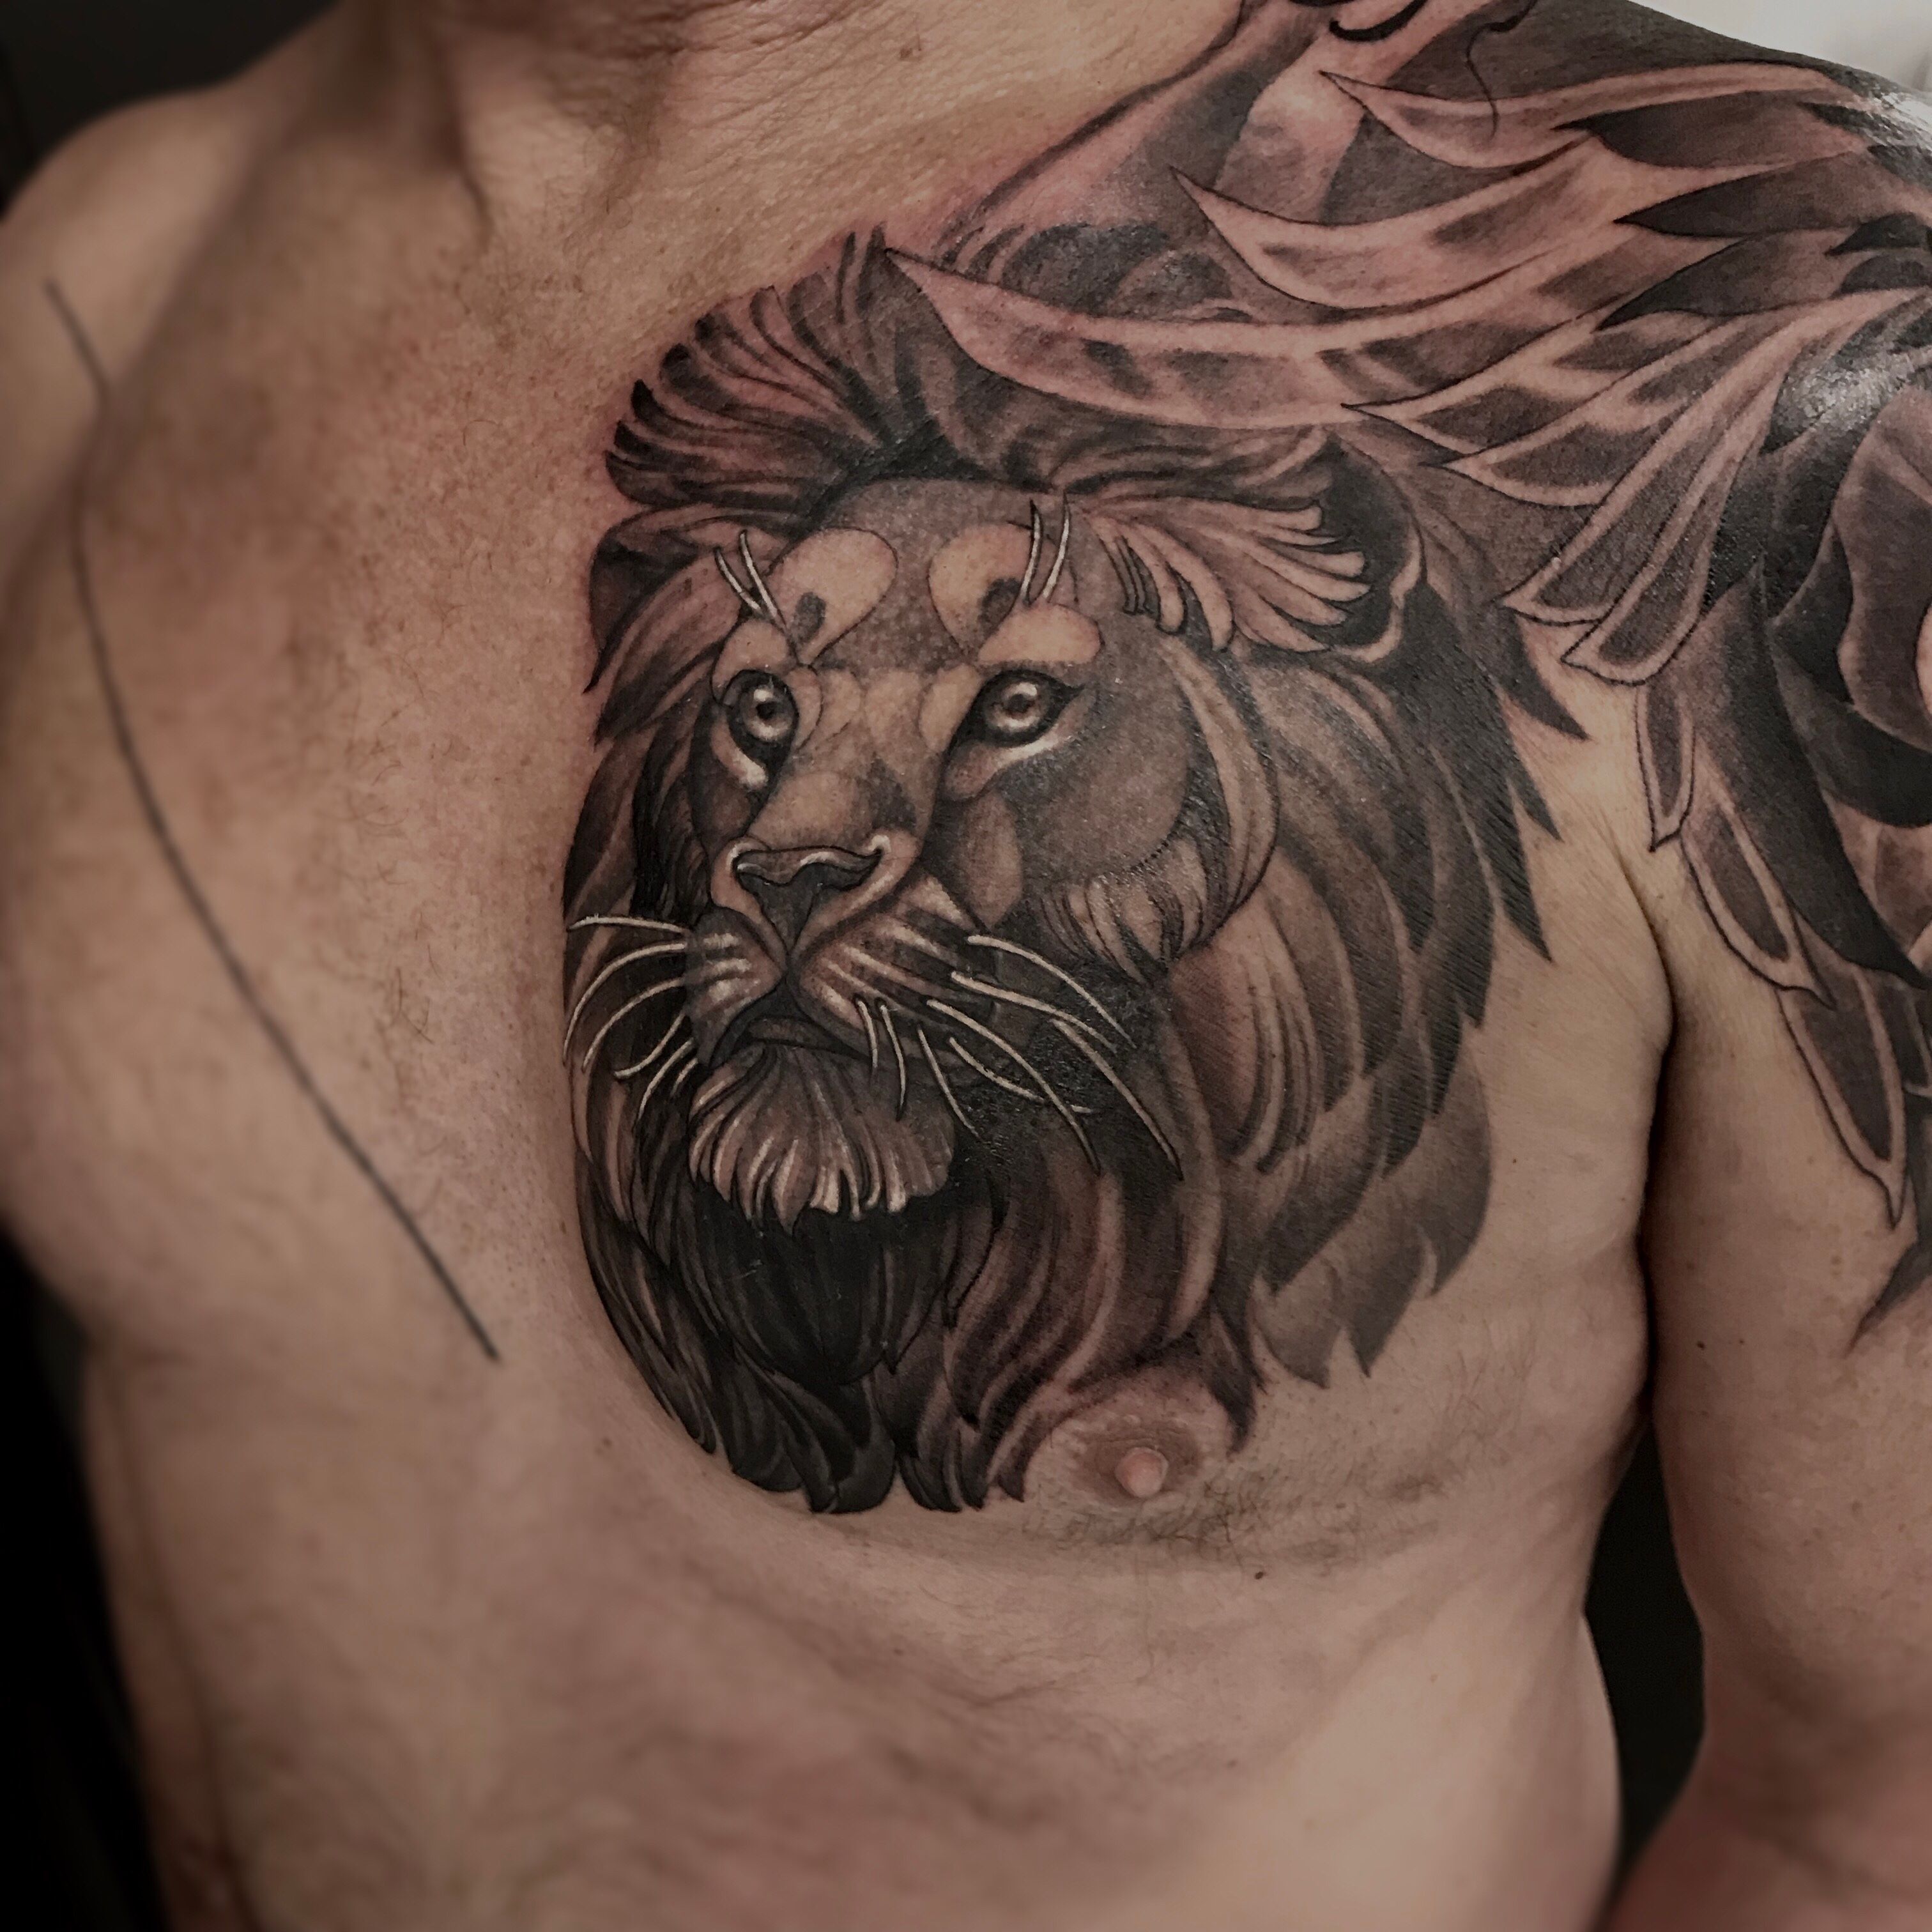 11+ Traditional Lion Tattoos Ideas That Will Blow Your Mind! - alexie